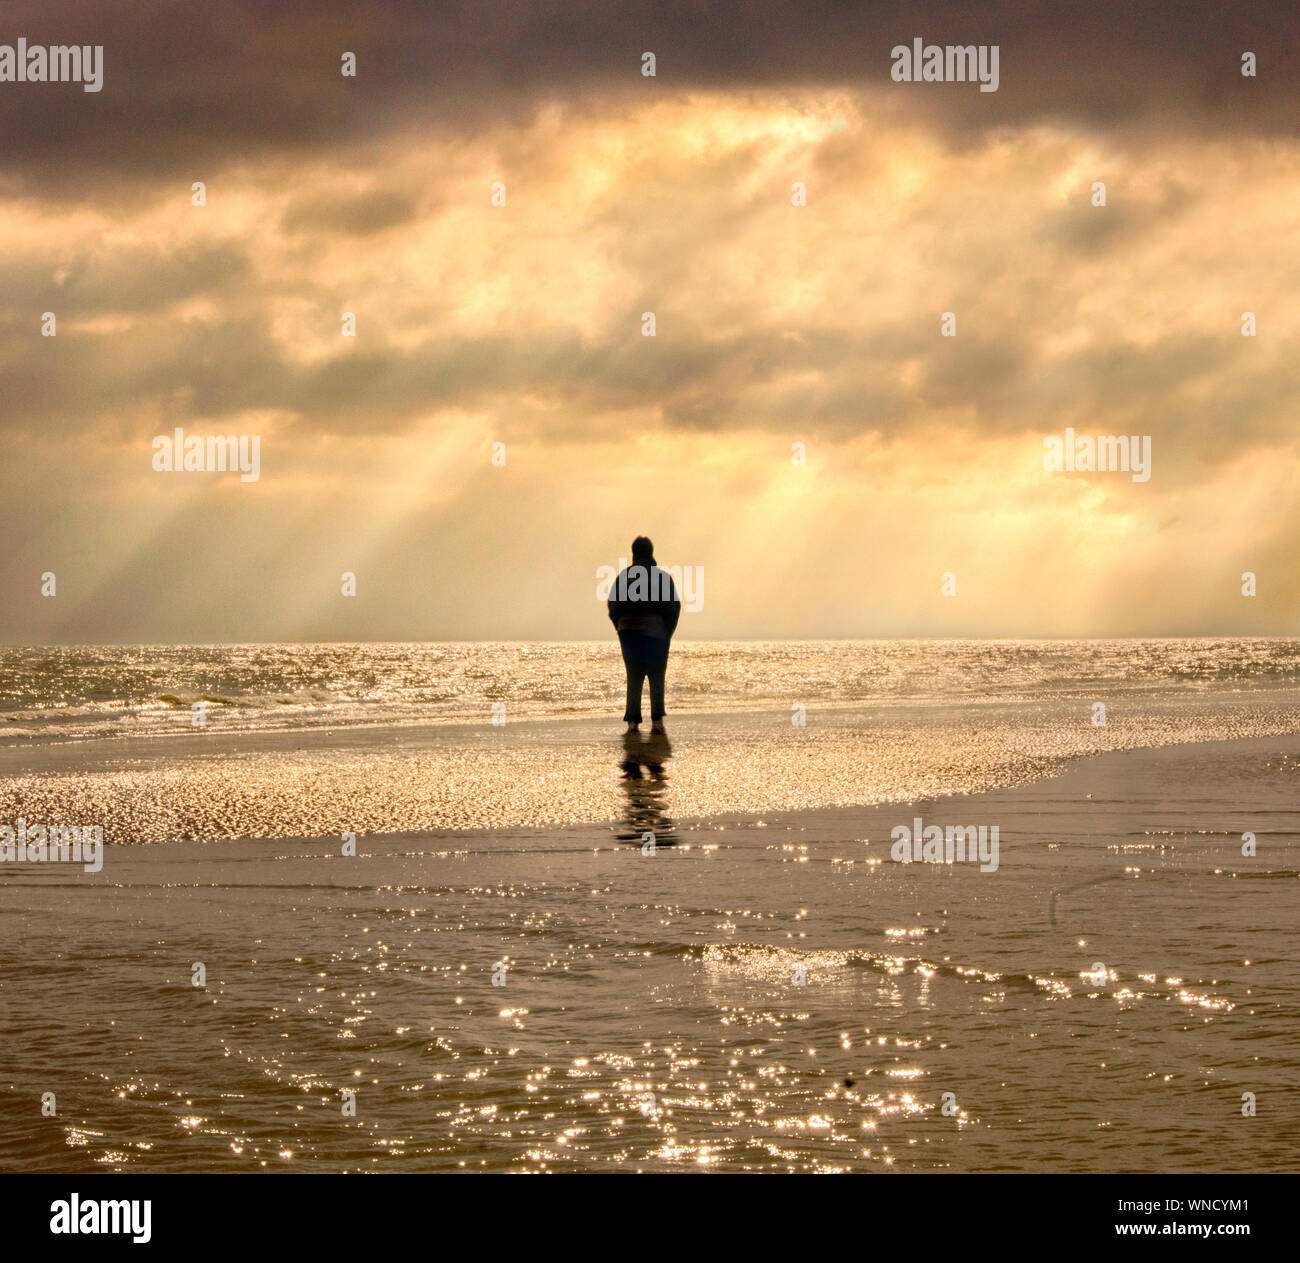 Stading Alone on the Beach Stock Photo